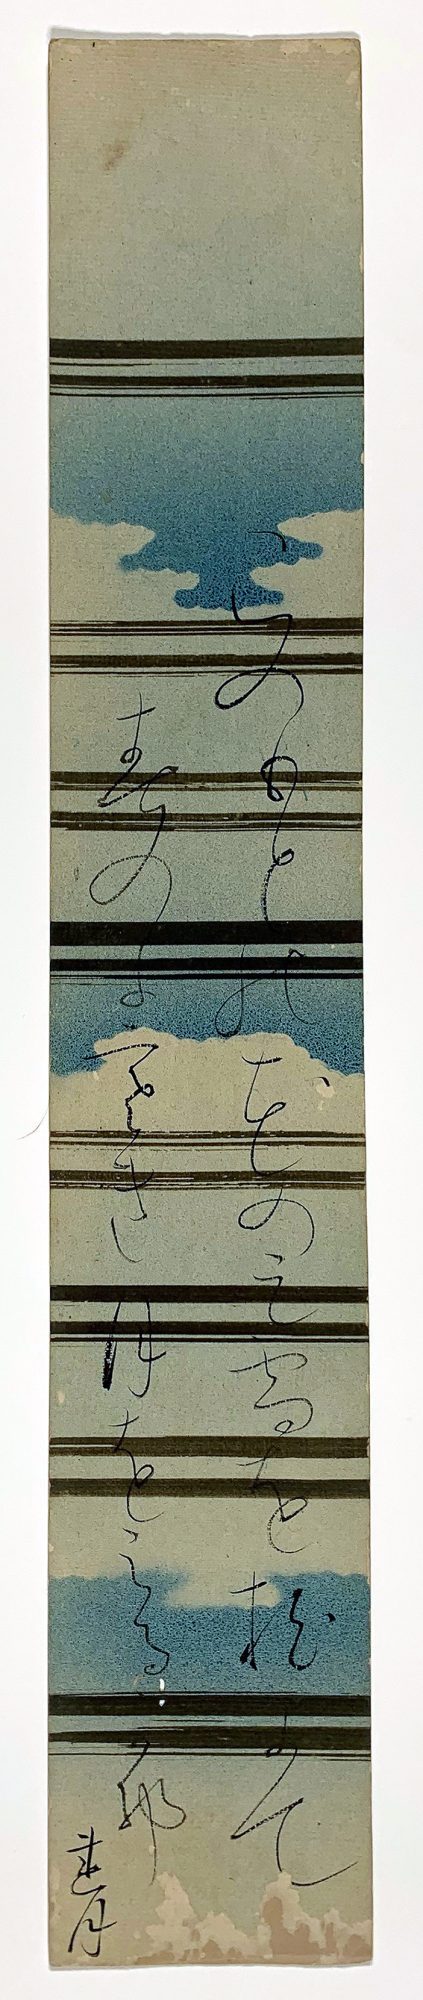 A poem written in Japanese calligraphy on a long paper scroll decorated with bands of indigo